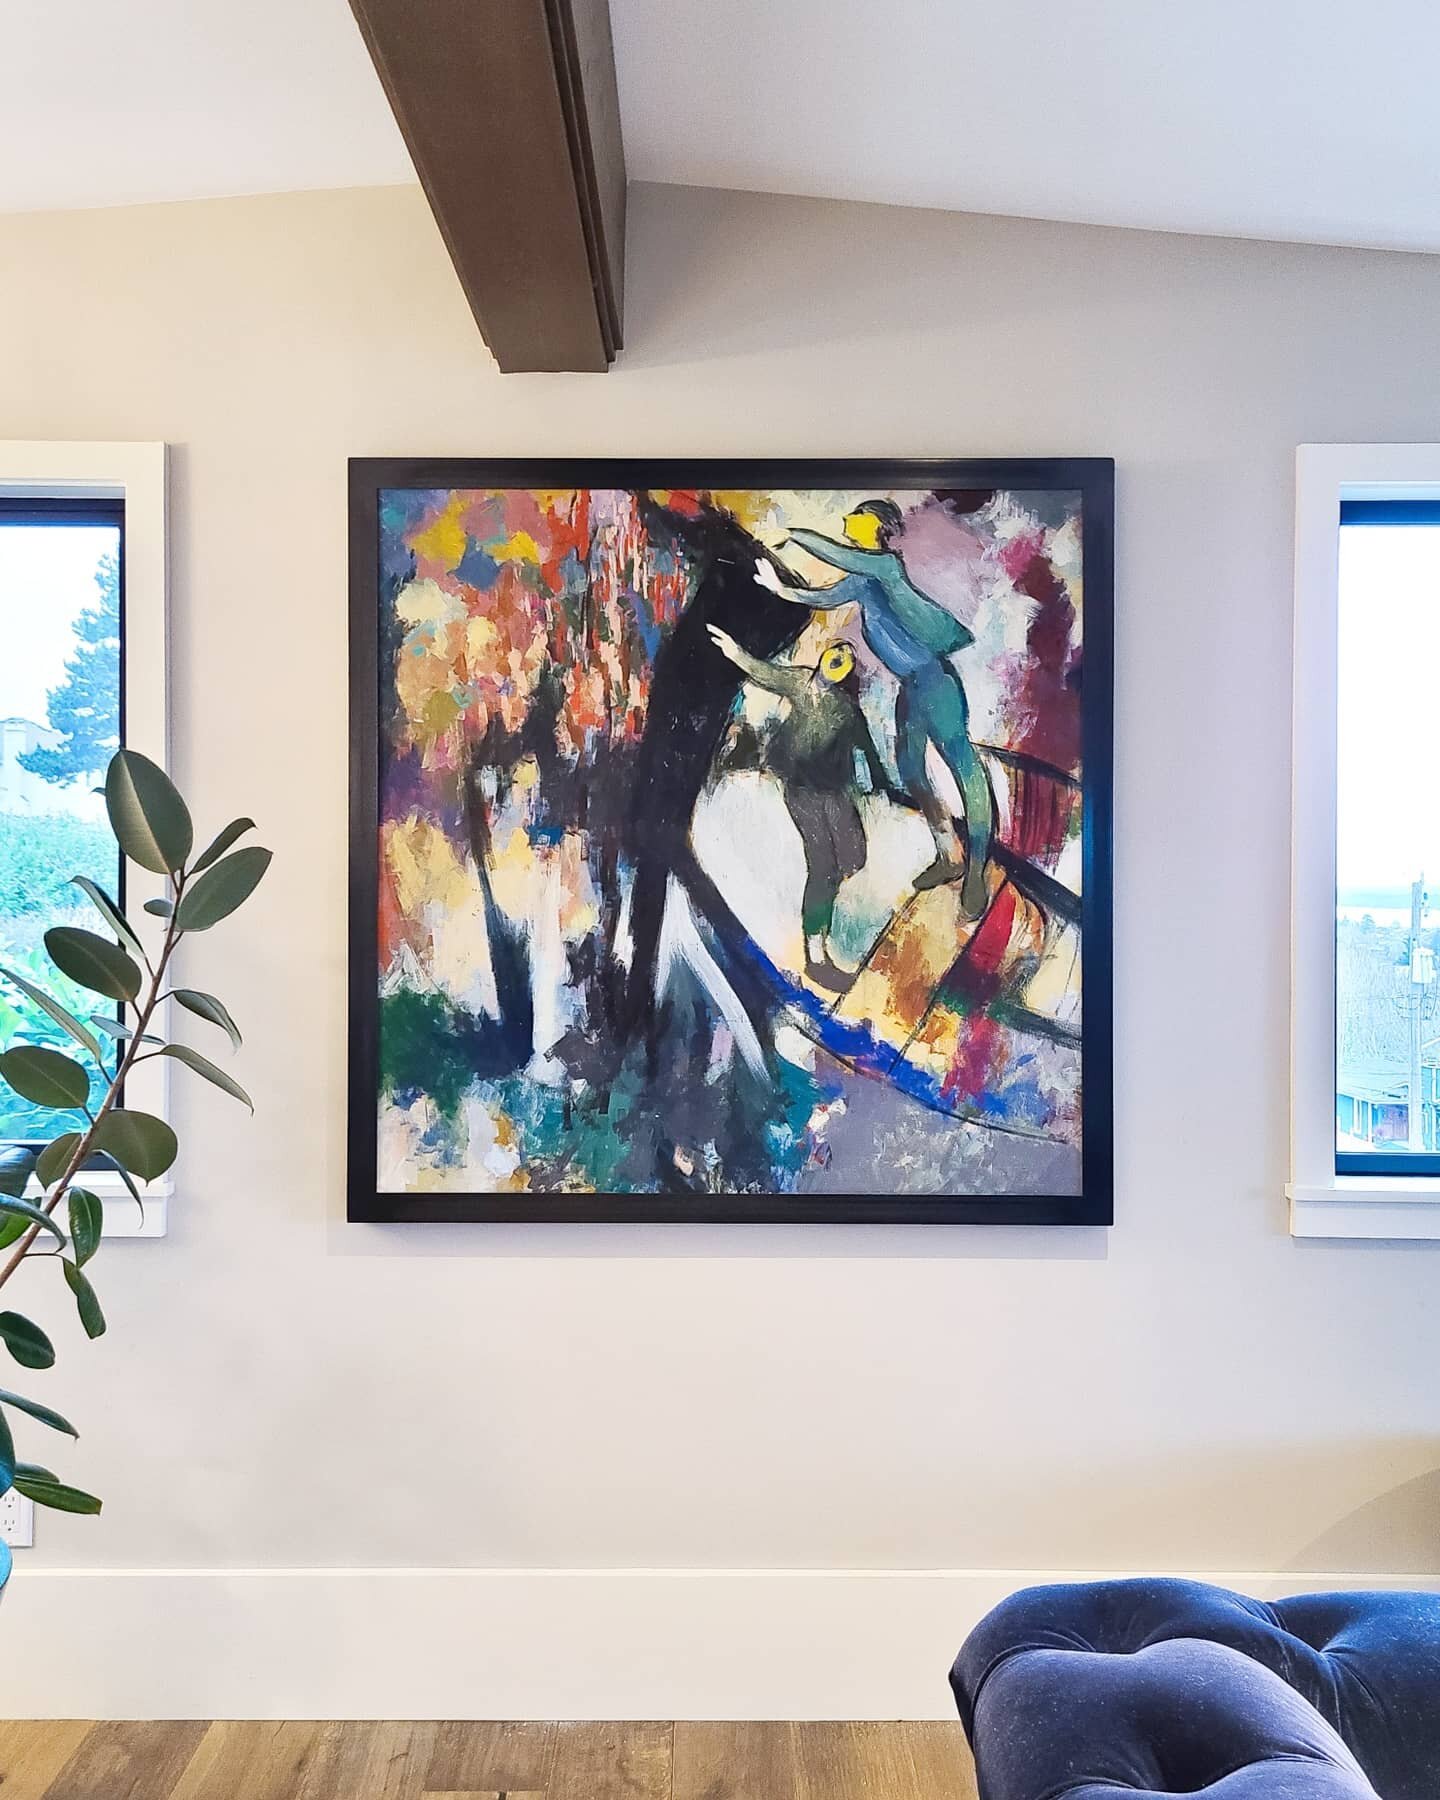 Another perfect pairing: a custom frame for a piece of beloved artwork with a great story behind it. Simple and bold hot rolled steel tie together the open layout. 

This is one of the finishing touches we had the pleasure of making for a gorgeous #m